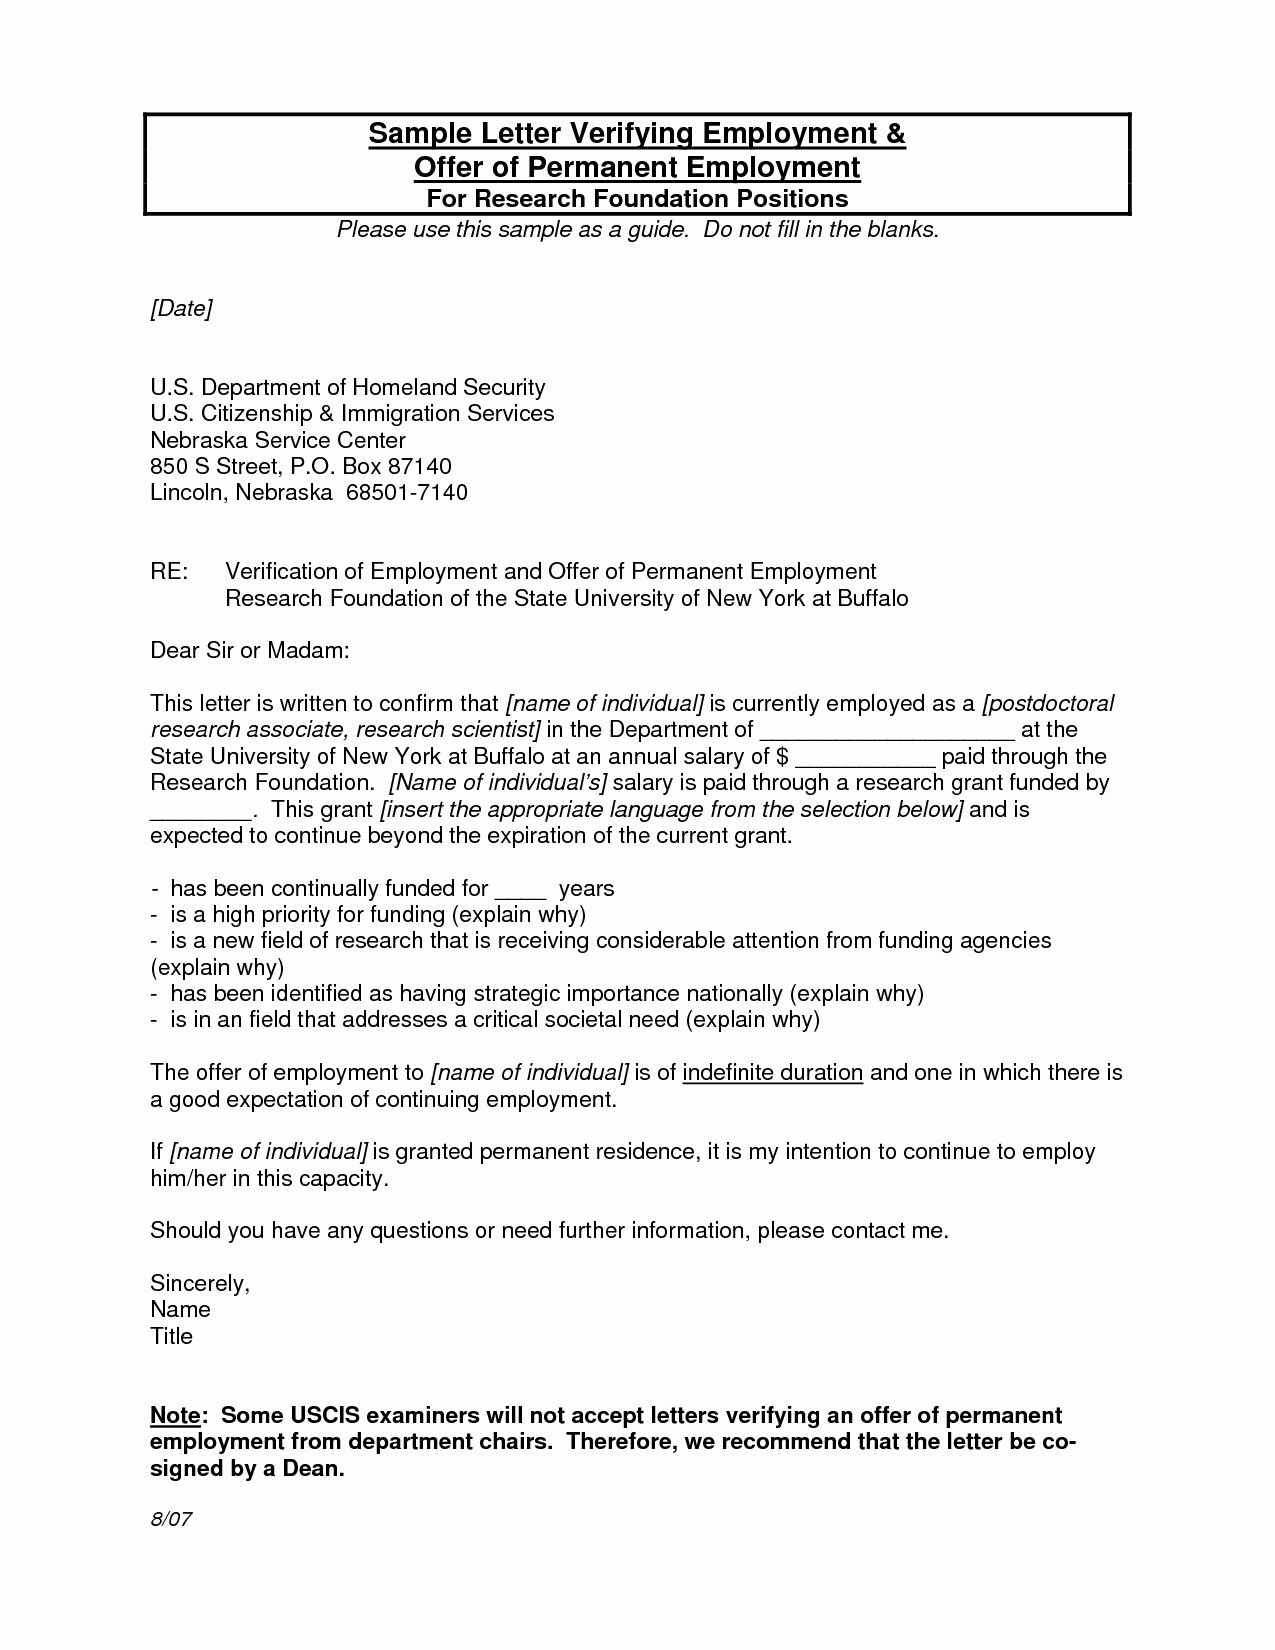 Green Card Recommendation Letter Lovely New Employment Verification Letter Sample for Green Card